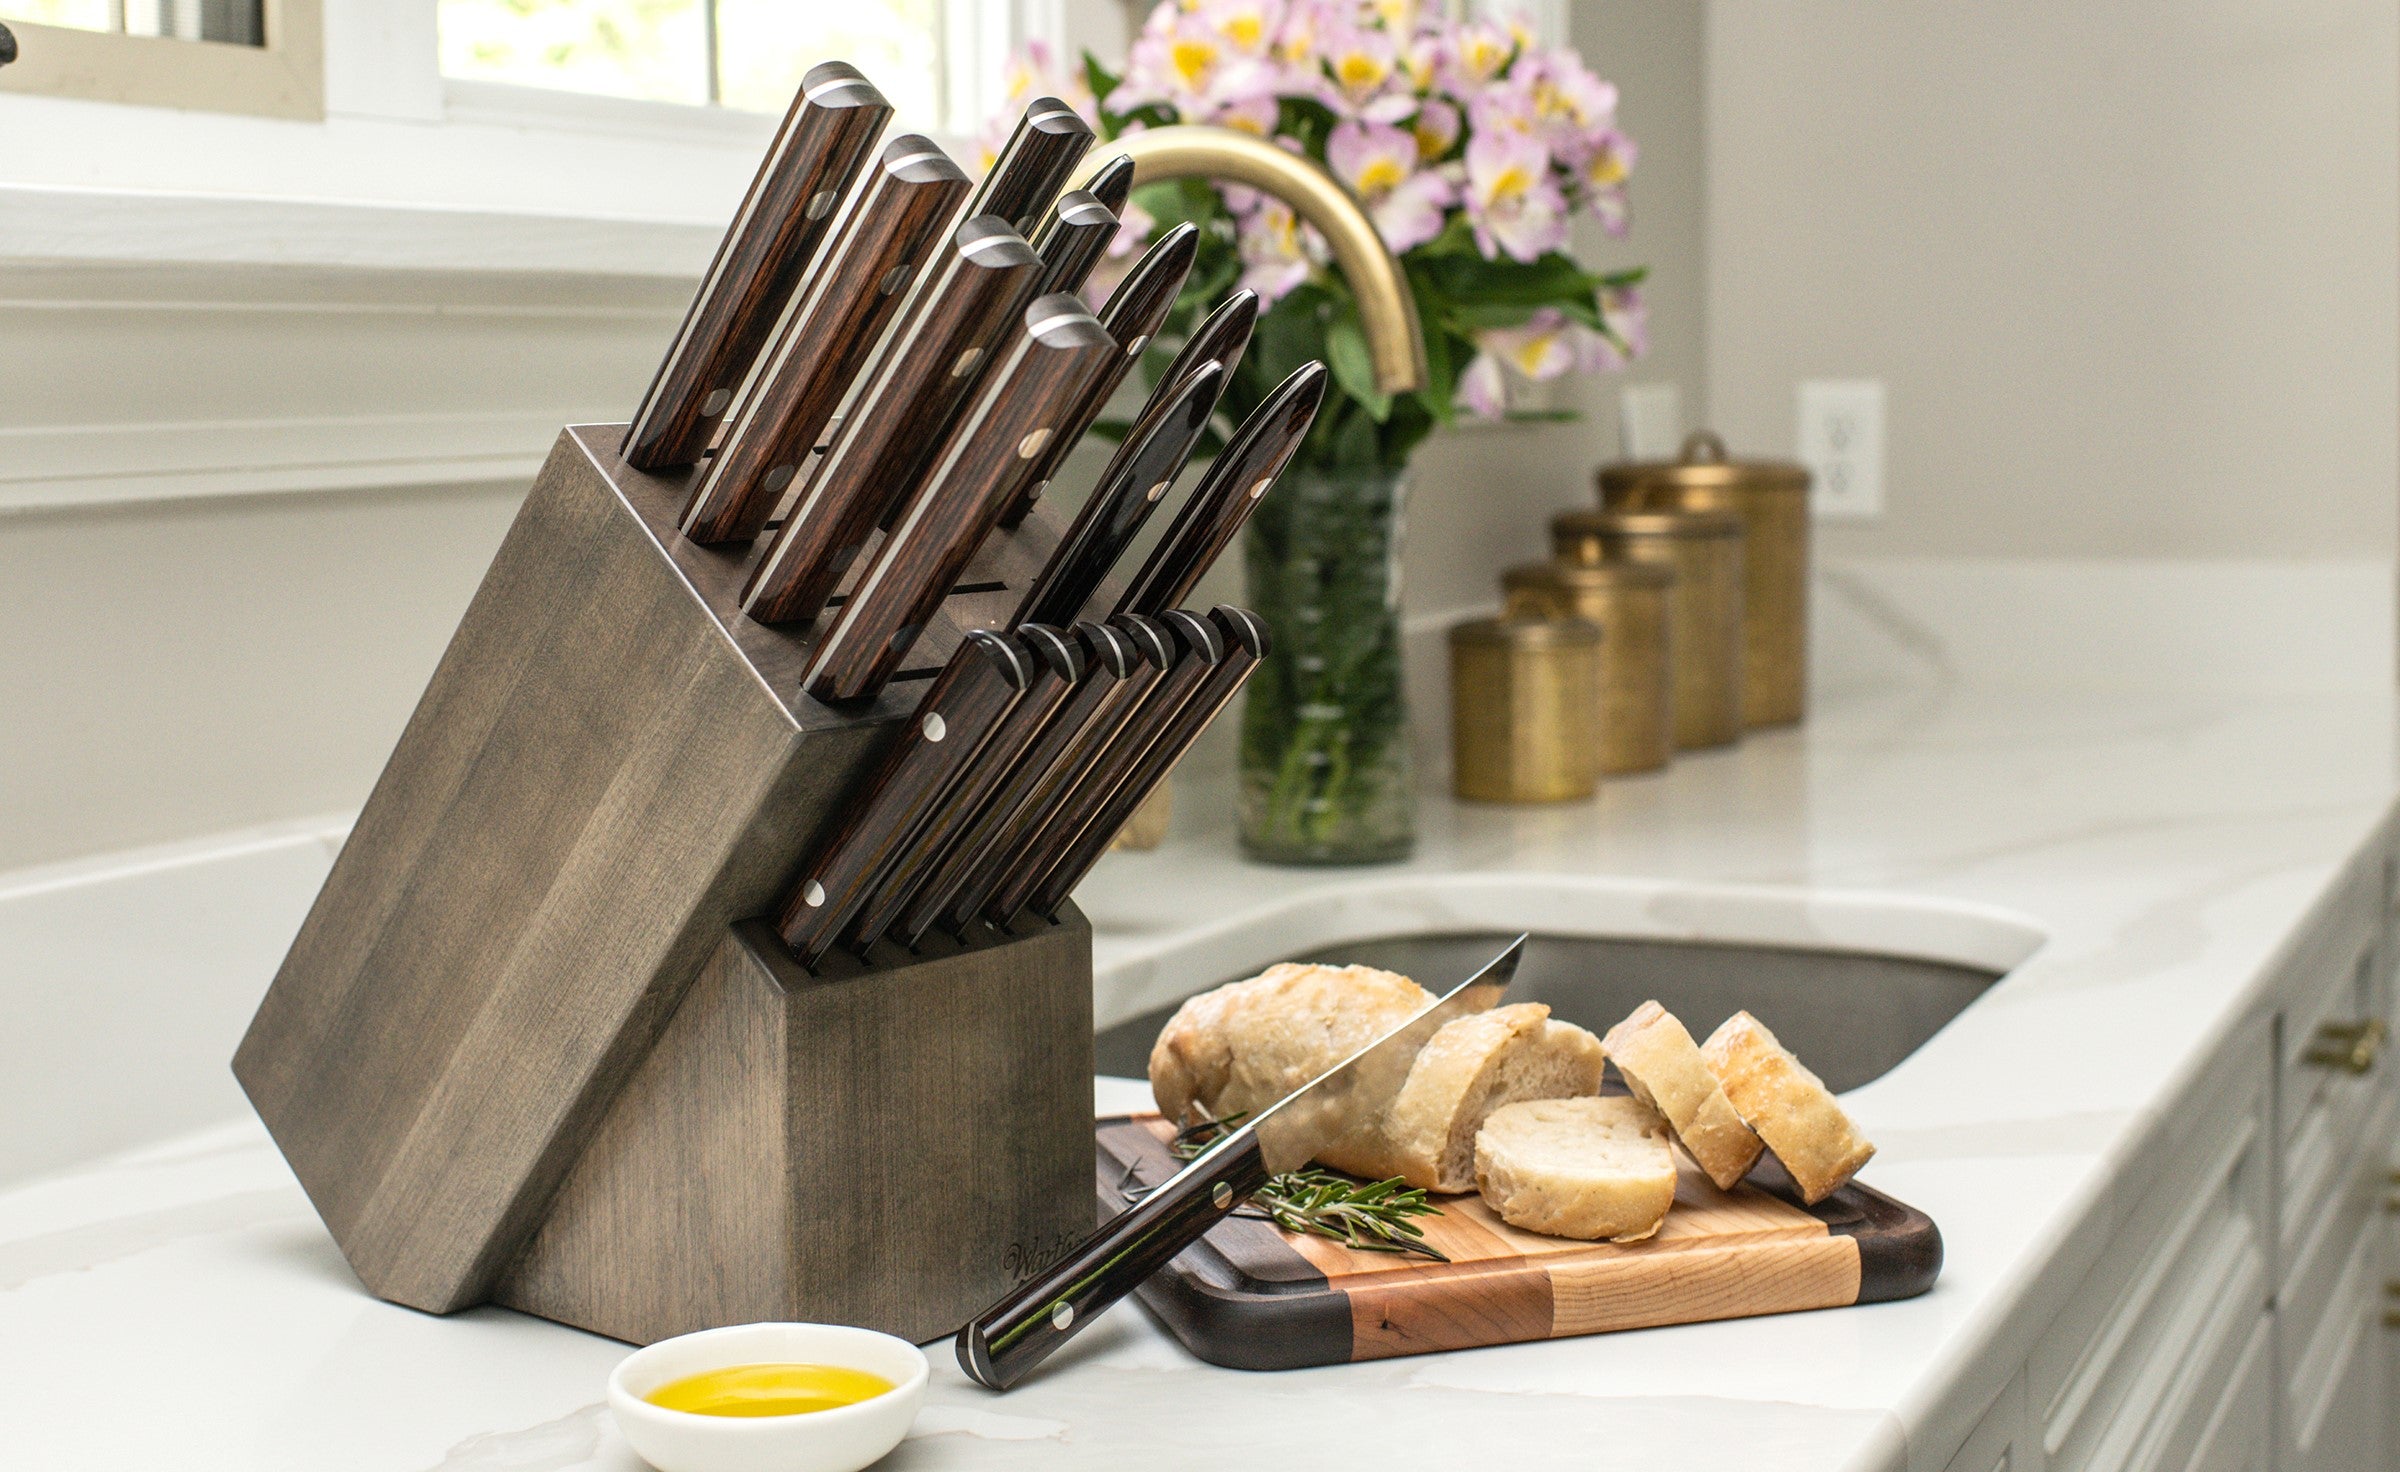 Knife Storage Systems: Boxes, Stands, Knife Blocks & Racks